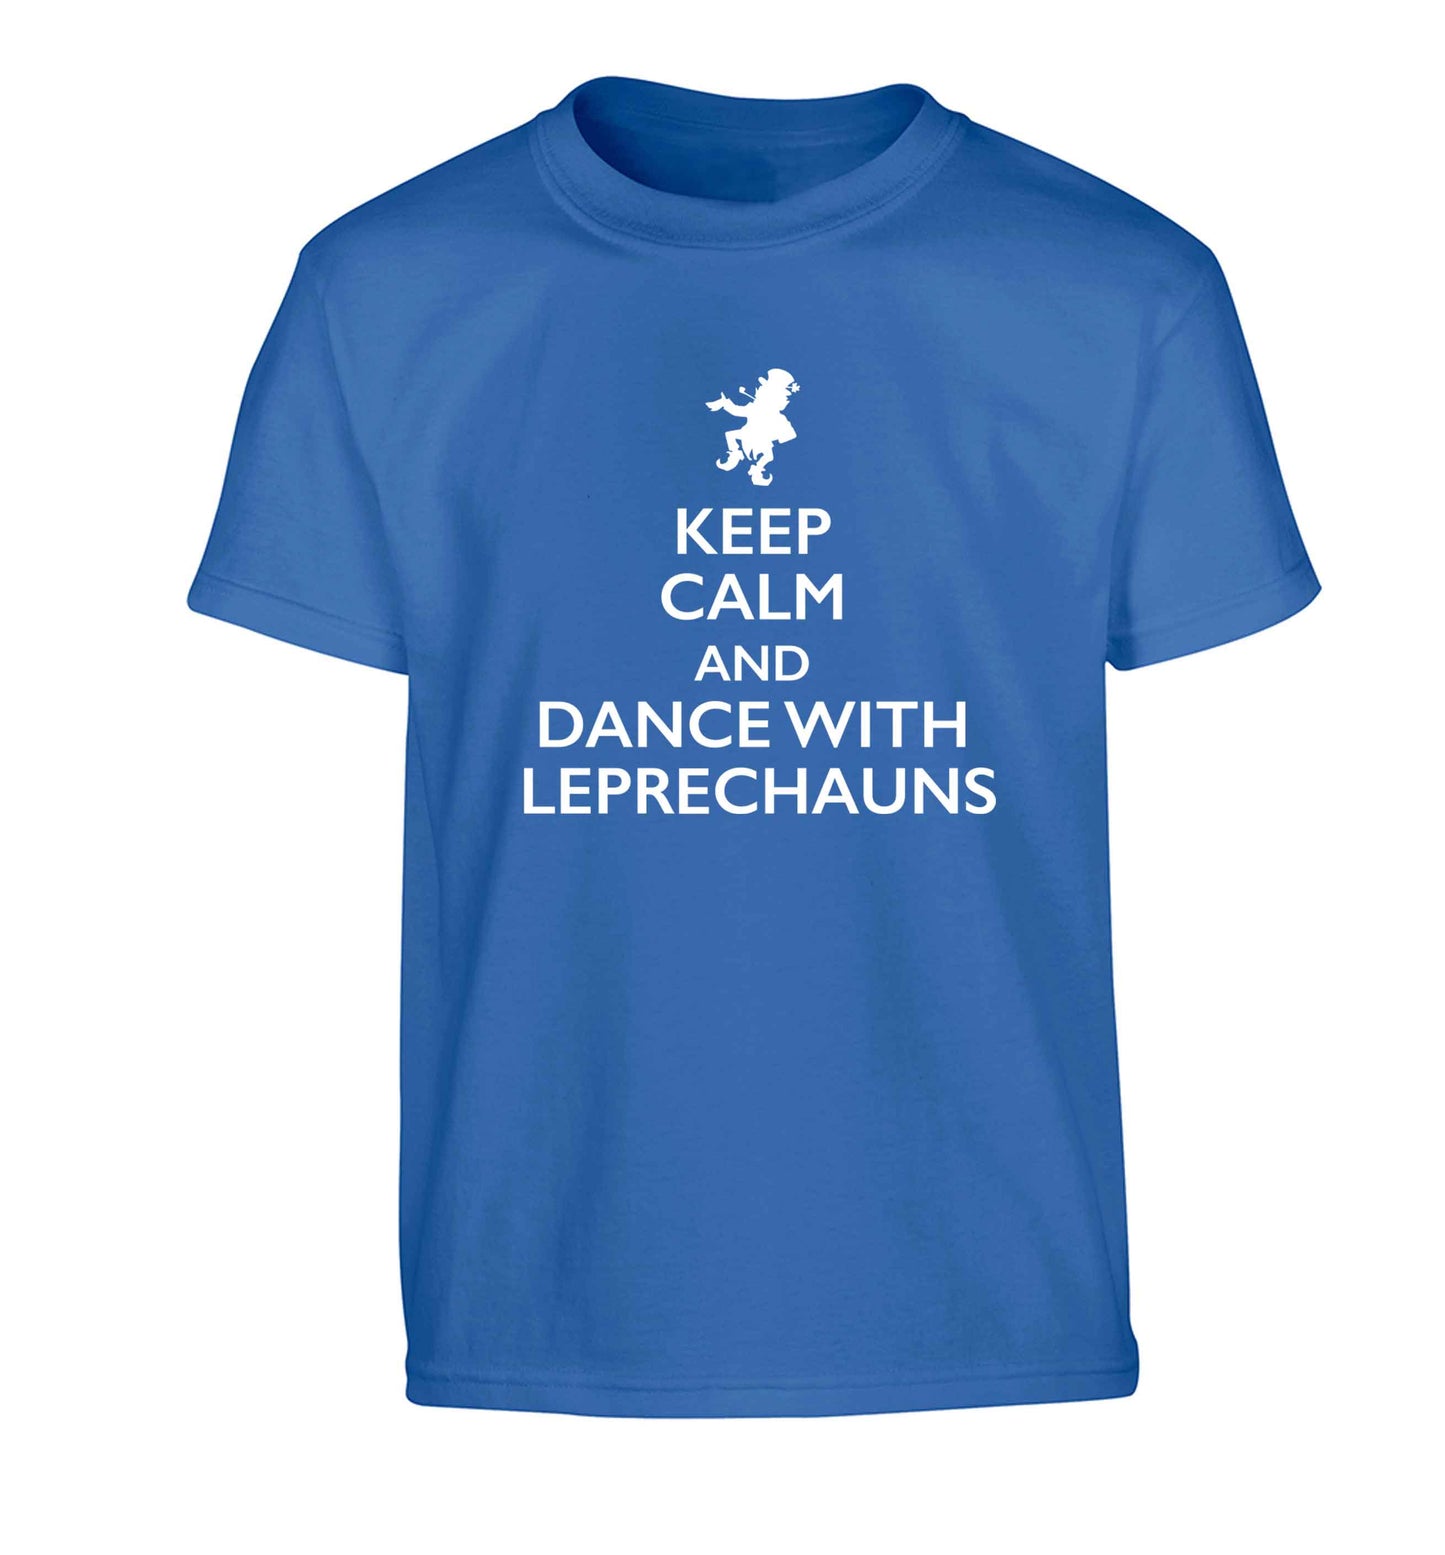 Keep calm and dance with leprechauns Children's blue Tshirt 12-13 Years